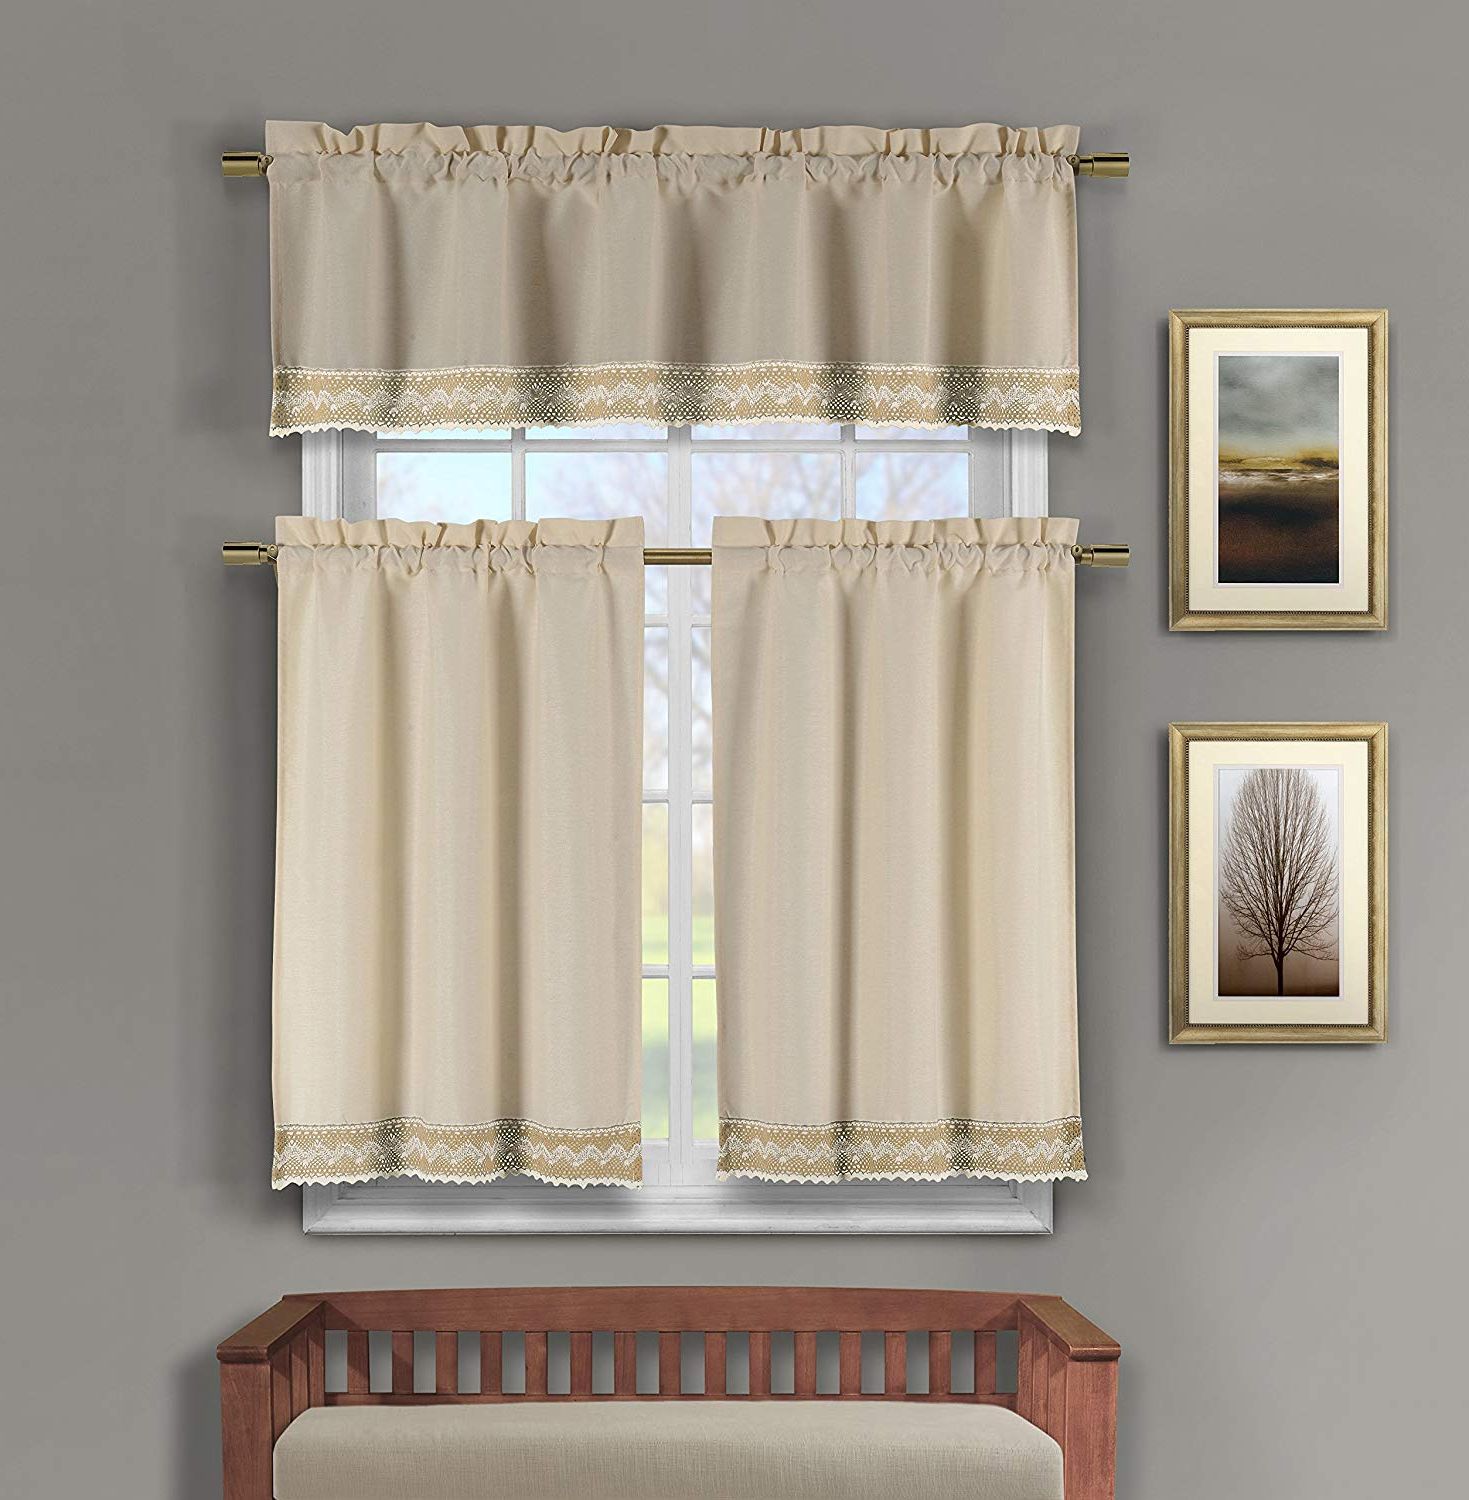 Cotton Lace 5 Piece Window Tier And Swag Sets Throughout Best And Newest Home Maison Zoet Cotton Lace Kitchen 3 Piece Window Curtain Tier & Valance  Set, 2 29 X 36 & One 58 X 15, Linen Taupe (View 1 of 20)